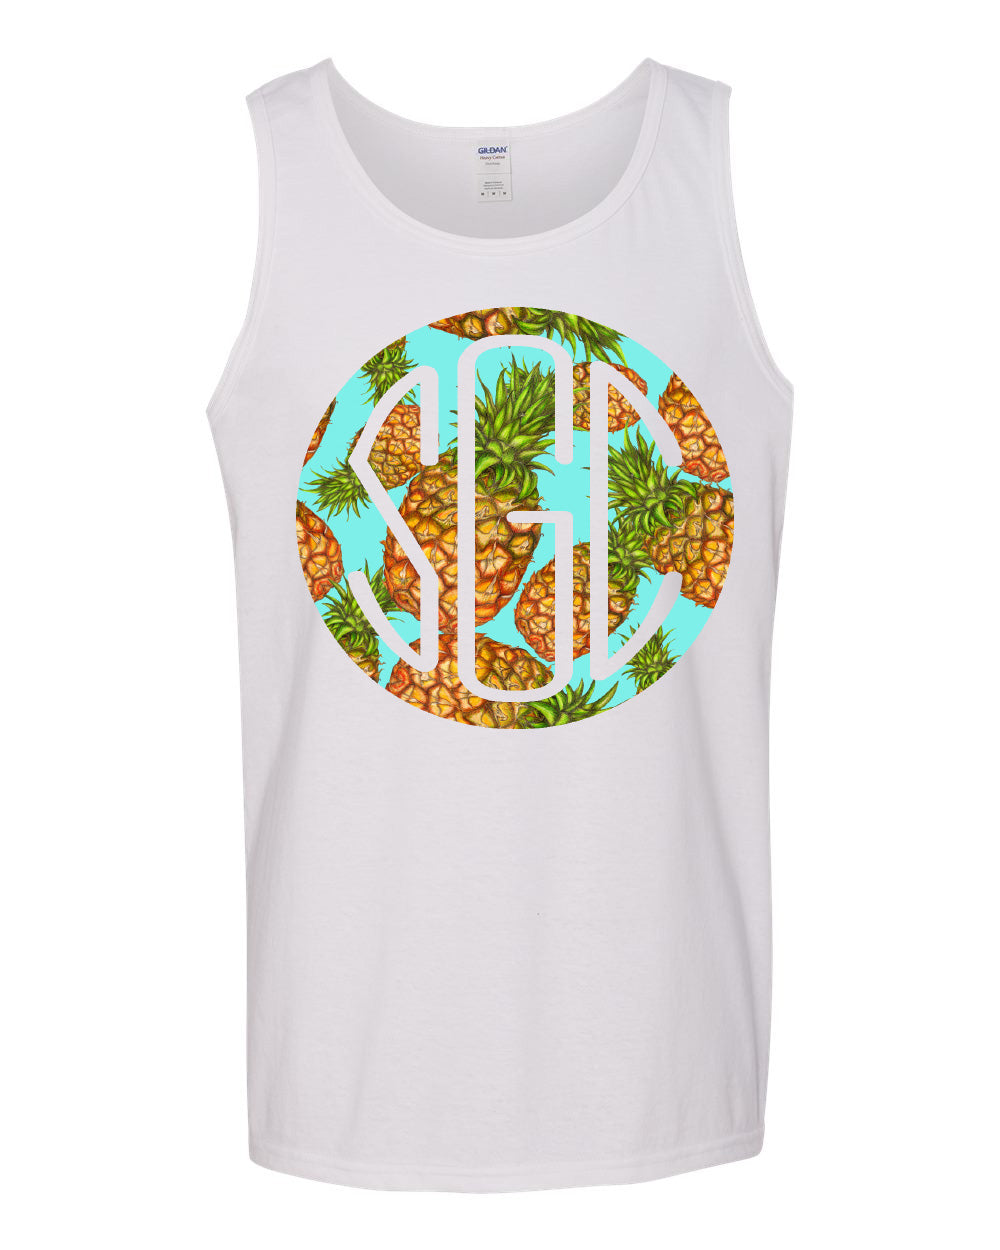 PINEAPPLE ROUND MONOGRAM PRINTED SHIRT - Southern Grace Creations